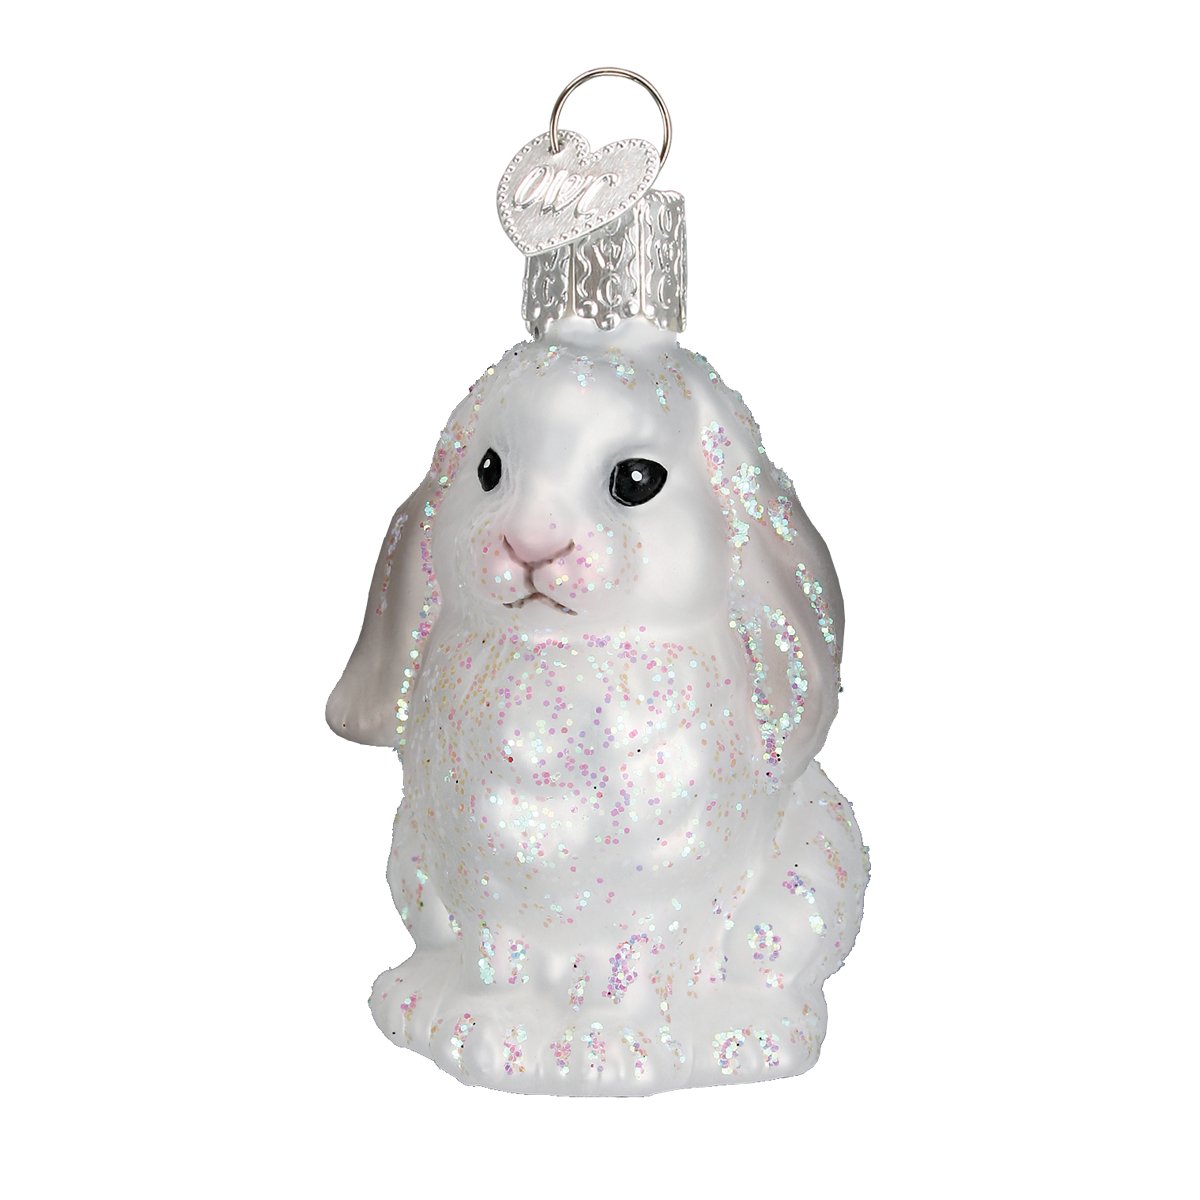 Old World Christmas - White Baby Bunny Ornament    